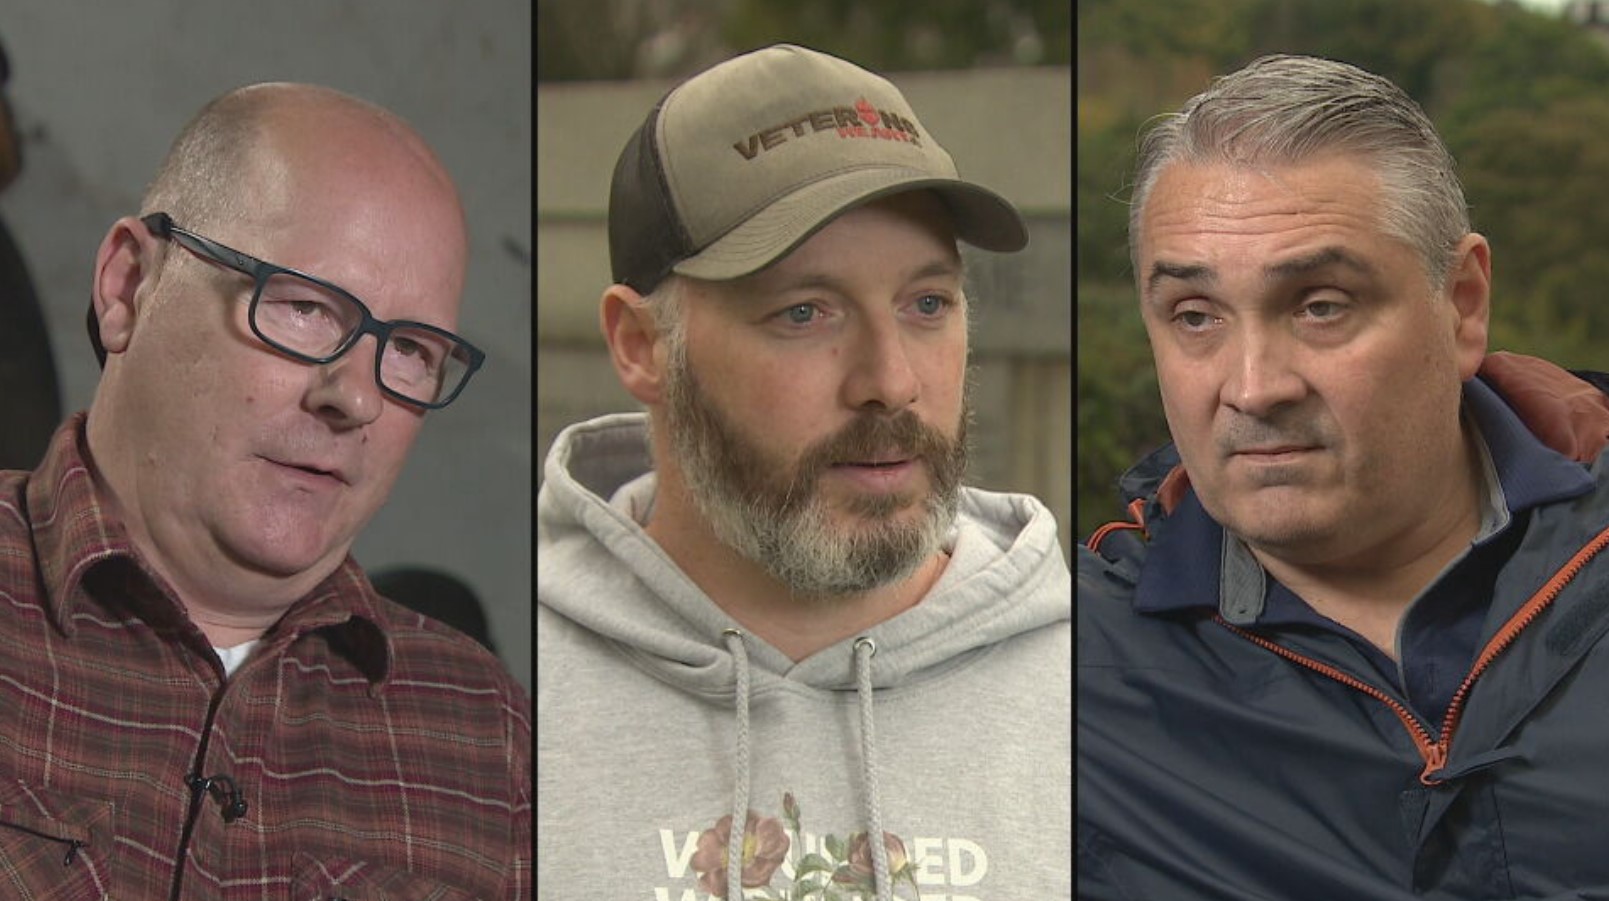 Veterans open up about struggles: Michael Gowans, Steve Beedie and Simon Lee Maryan.